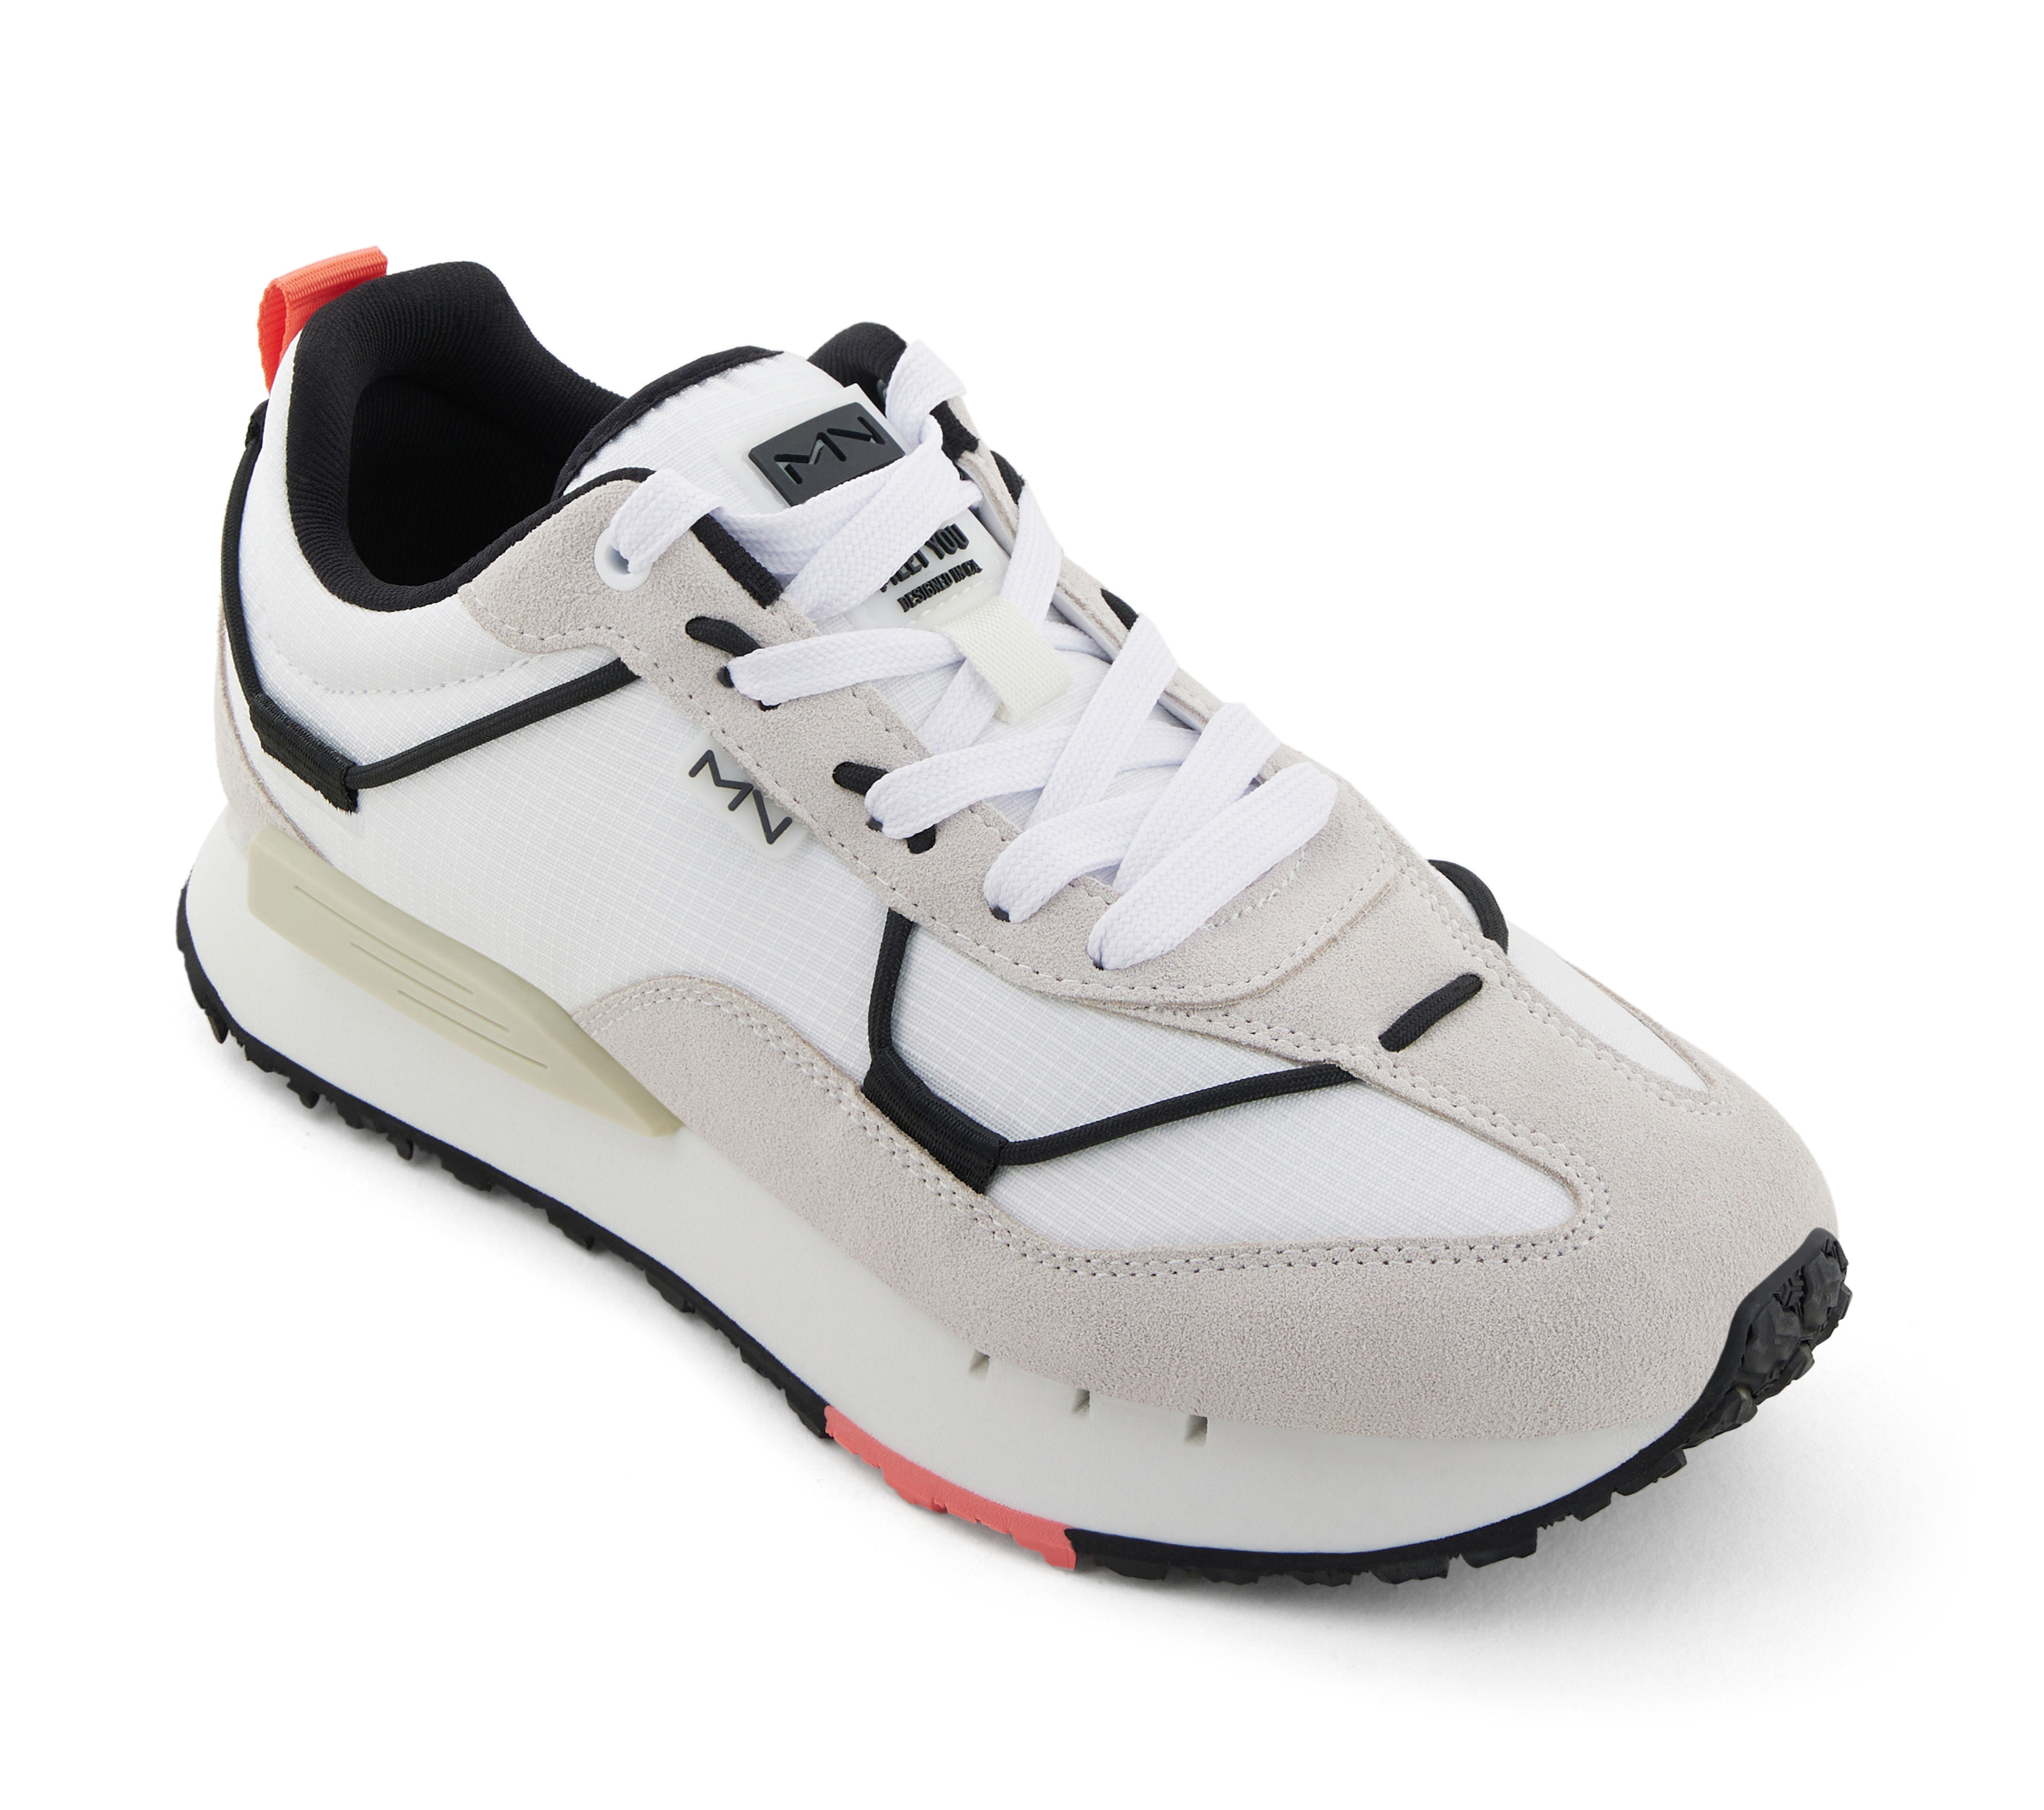 UPPER CUT CLASSIC JOGGER-PACE, NATURAL Footwear Lateral View